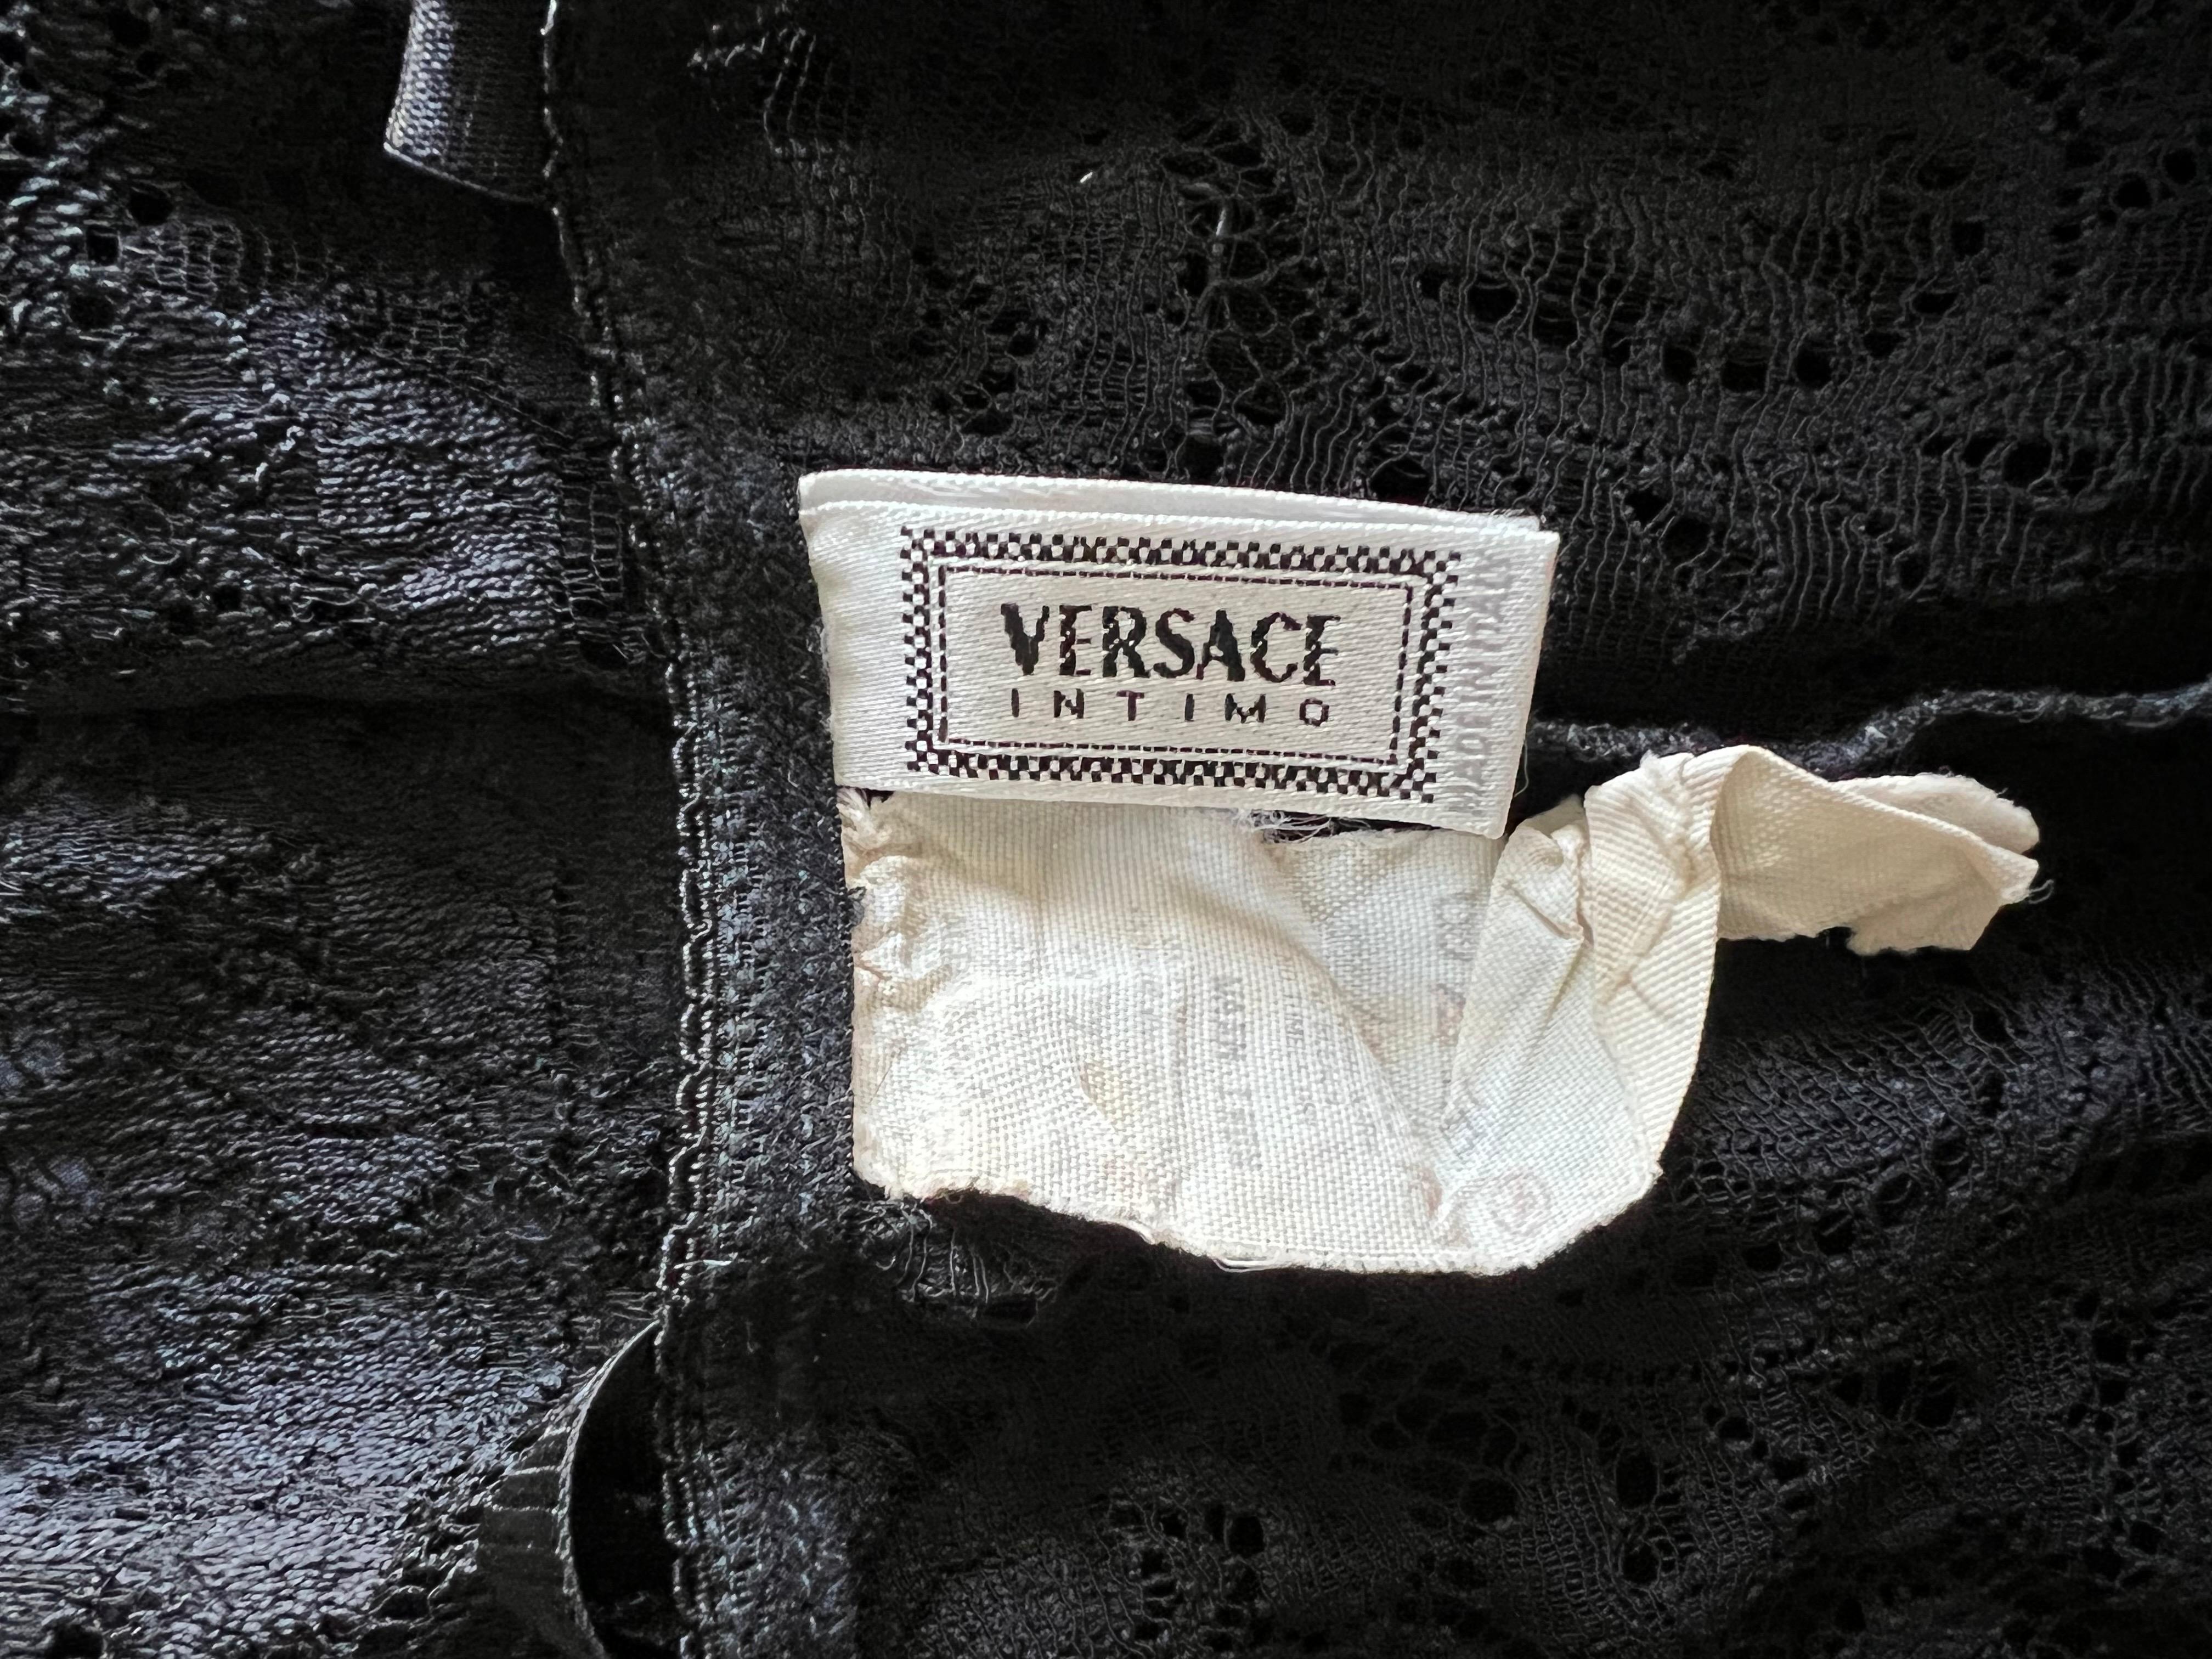 Gianni Versace S/S 1992 Vintage Plunging Baroque Print Sheer Lace Bodysuit Top  For Sale 6